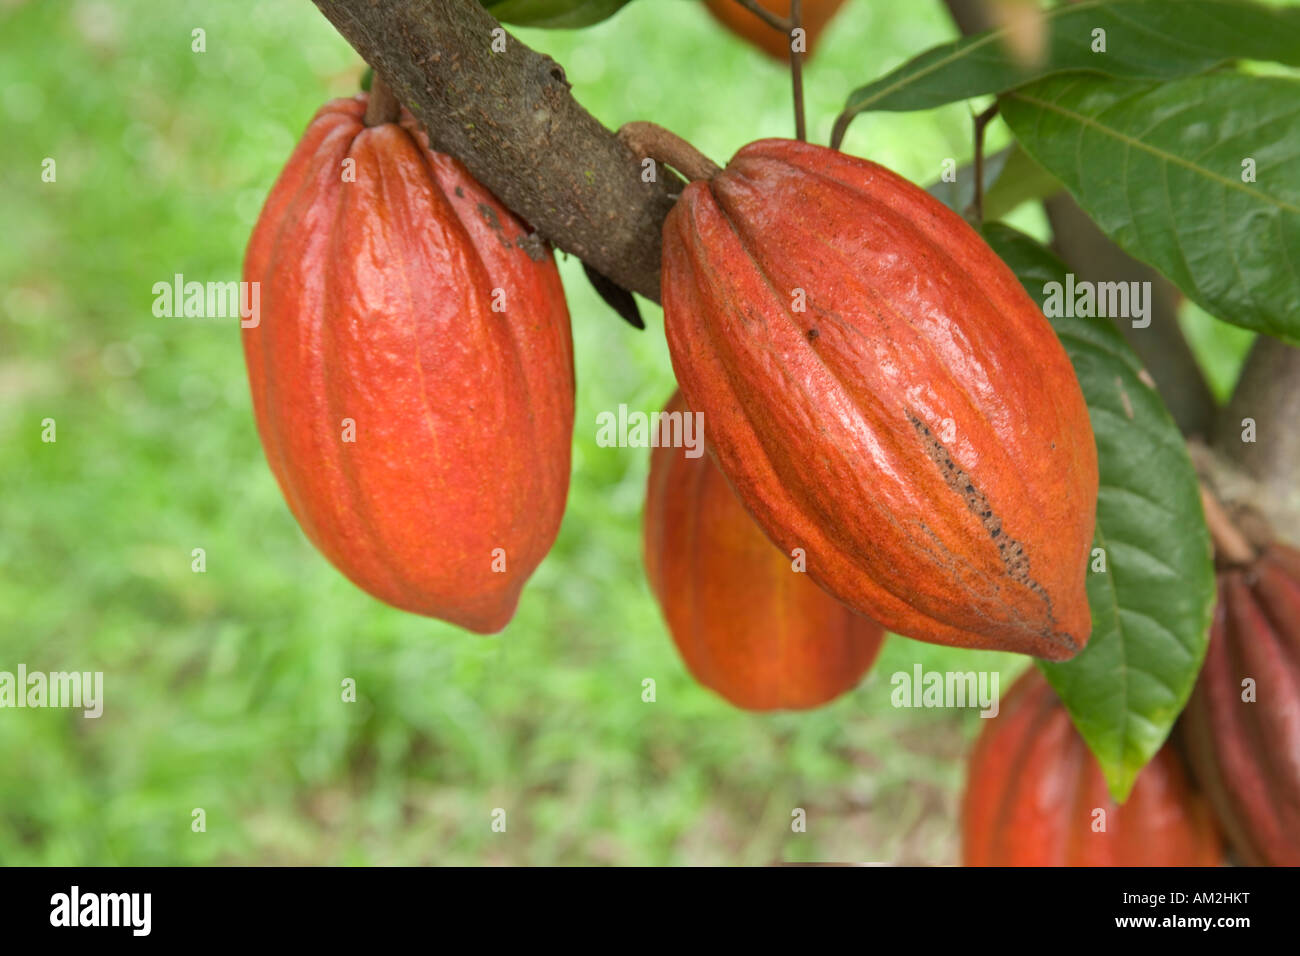 Maturing Cocoa pods growing on branch Stock Photo